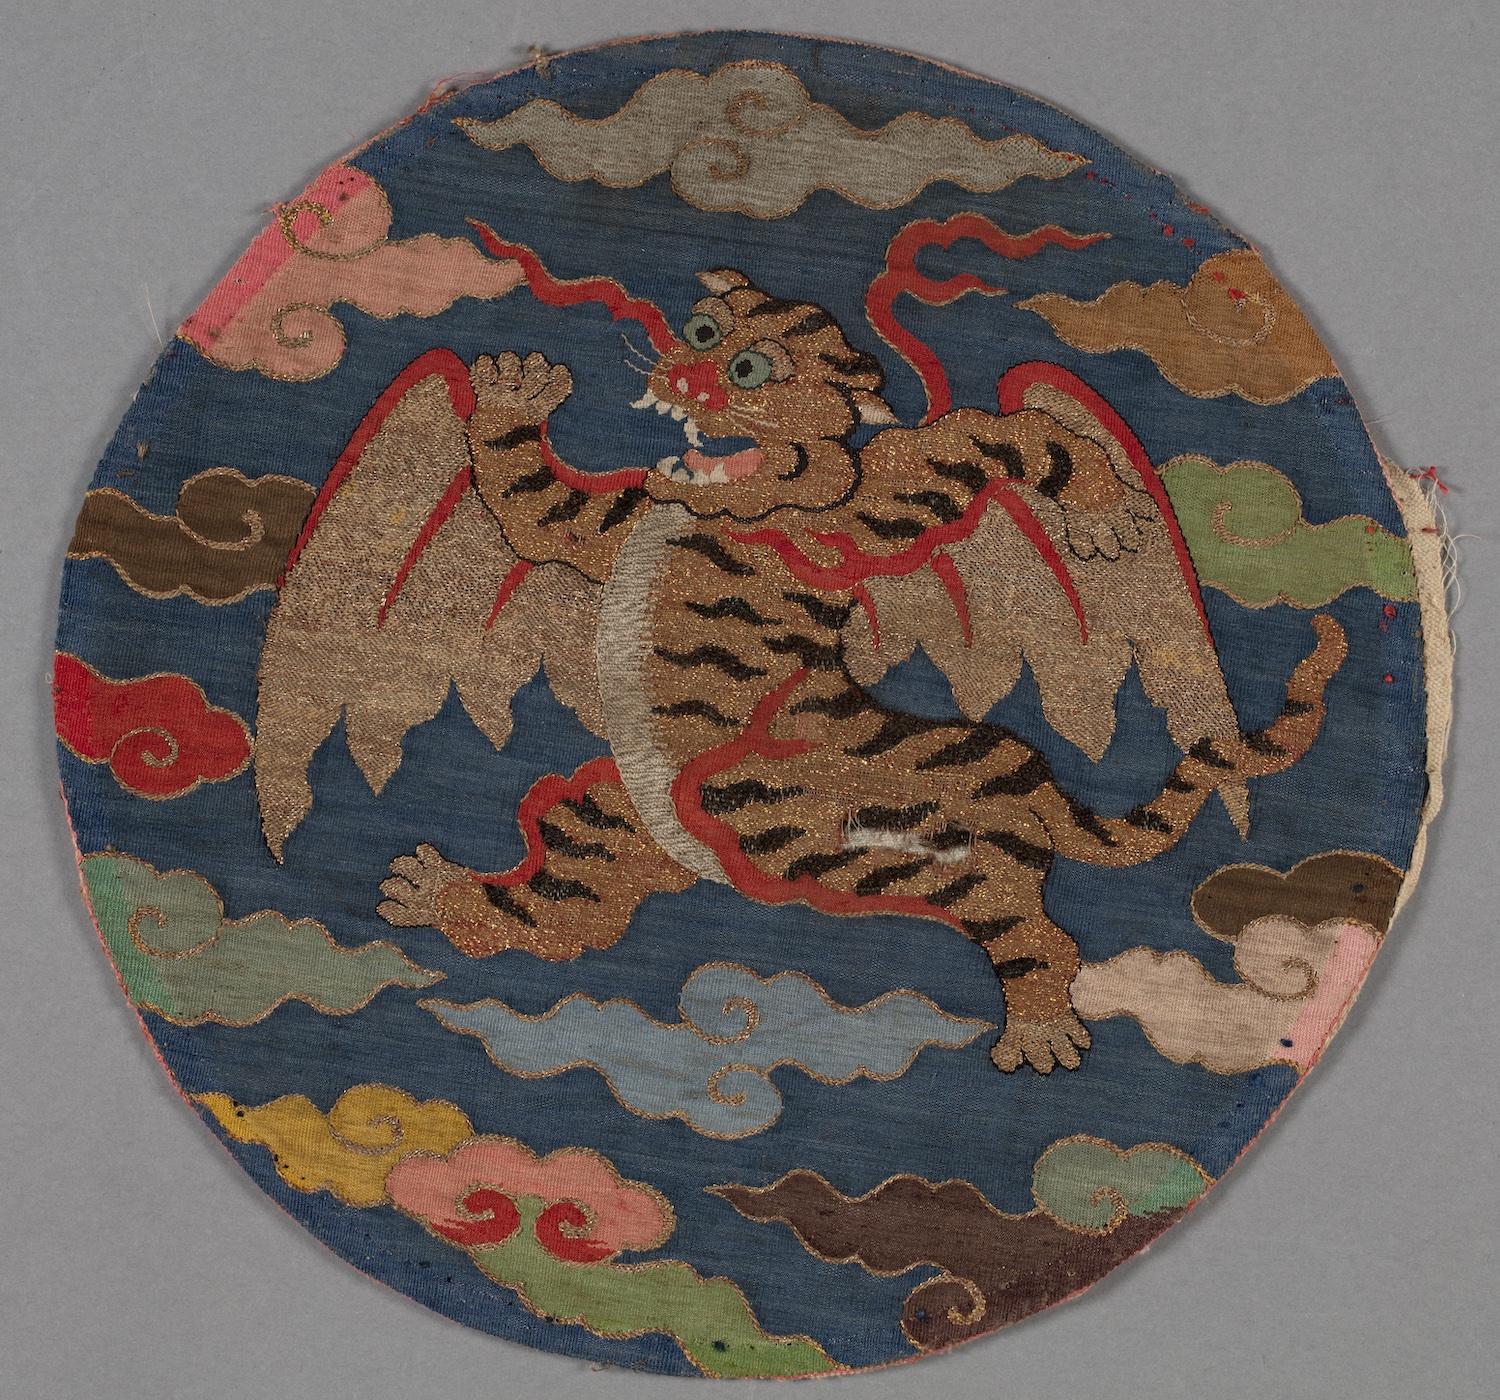 A round textile has a tiger centred in the design with wings of gold outstretched. The tiger, with teeth exposed, is in an active pose and is surrounded by a blue background and different coloured swirling clouds.